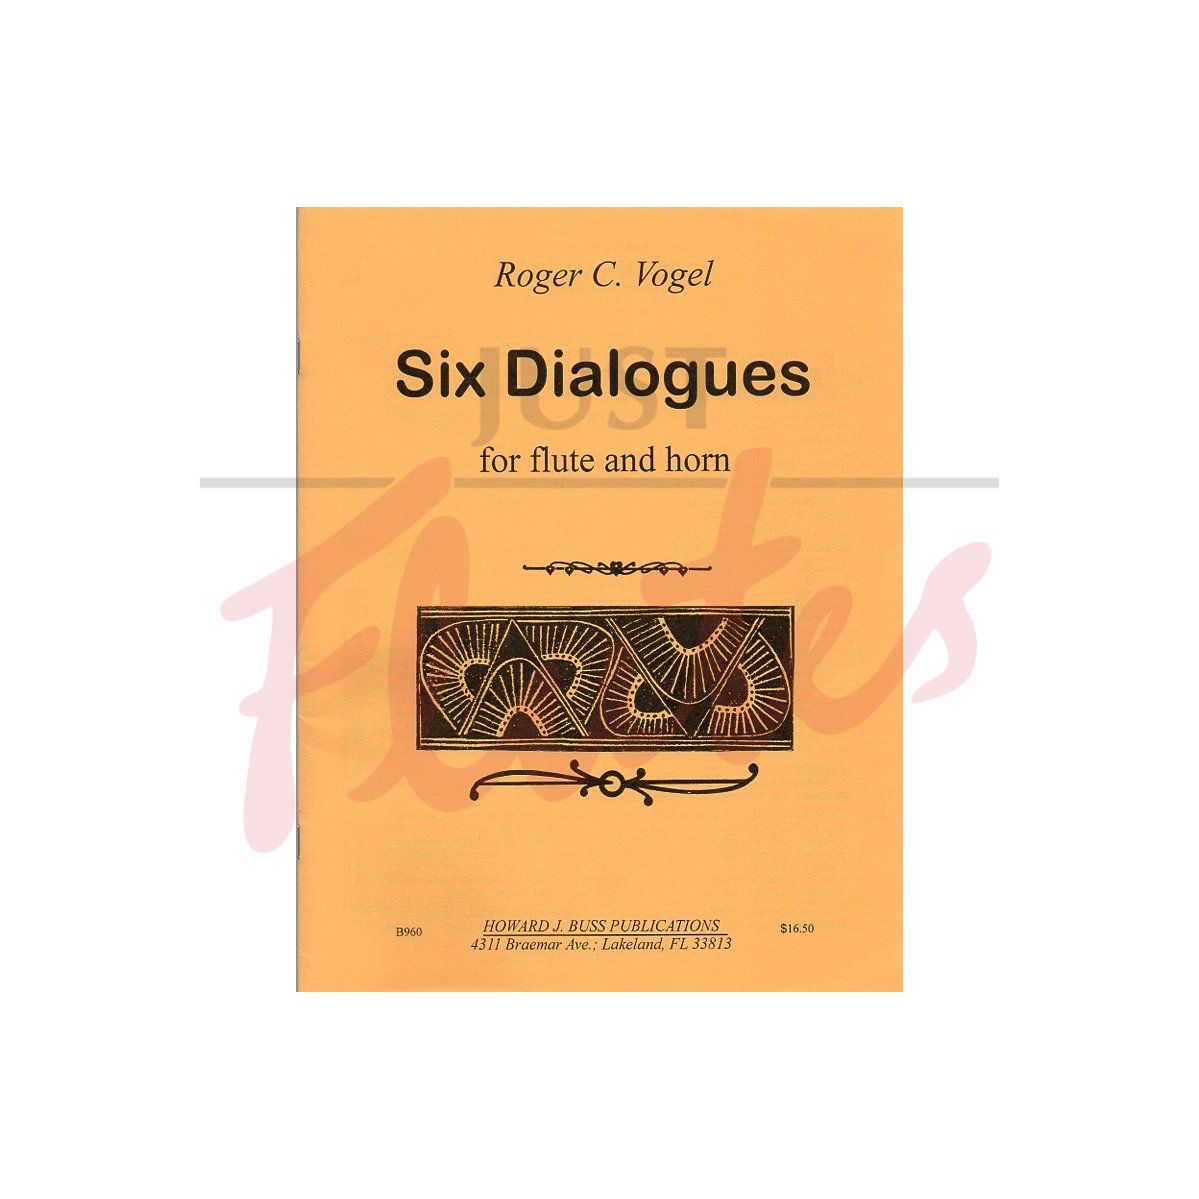 Six Dialogues for flute and horn